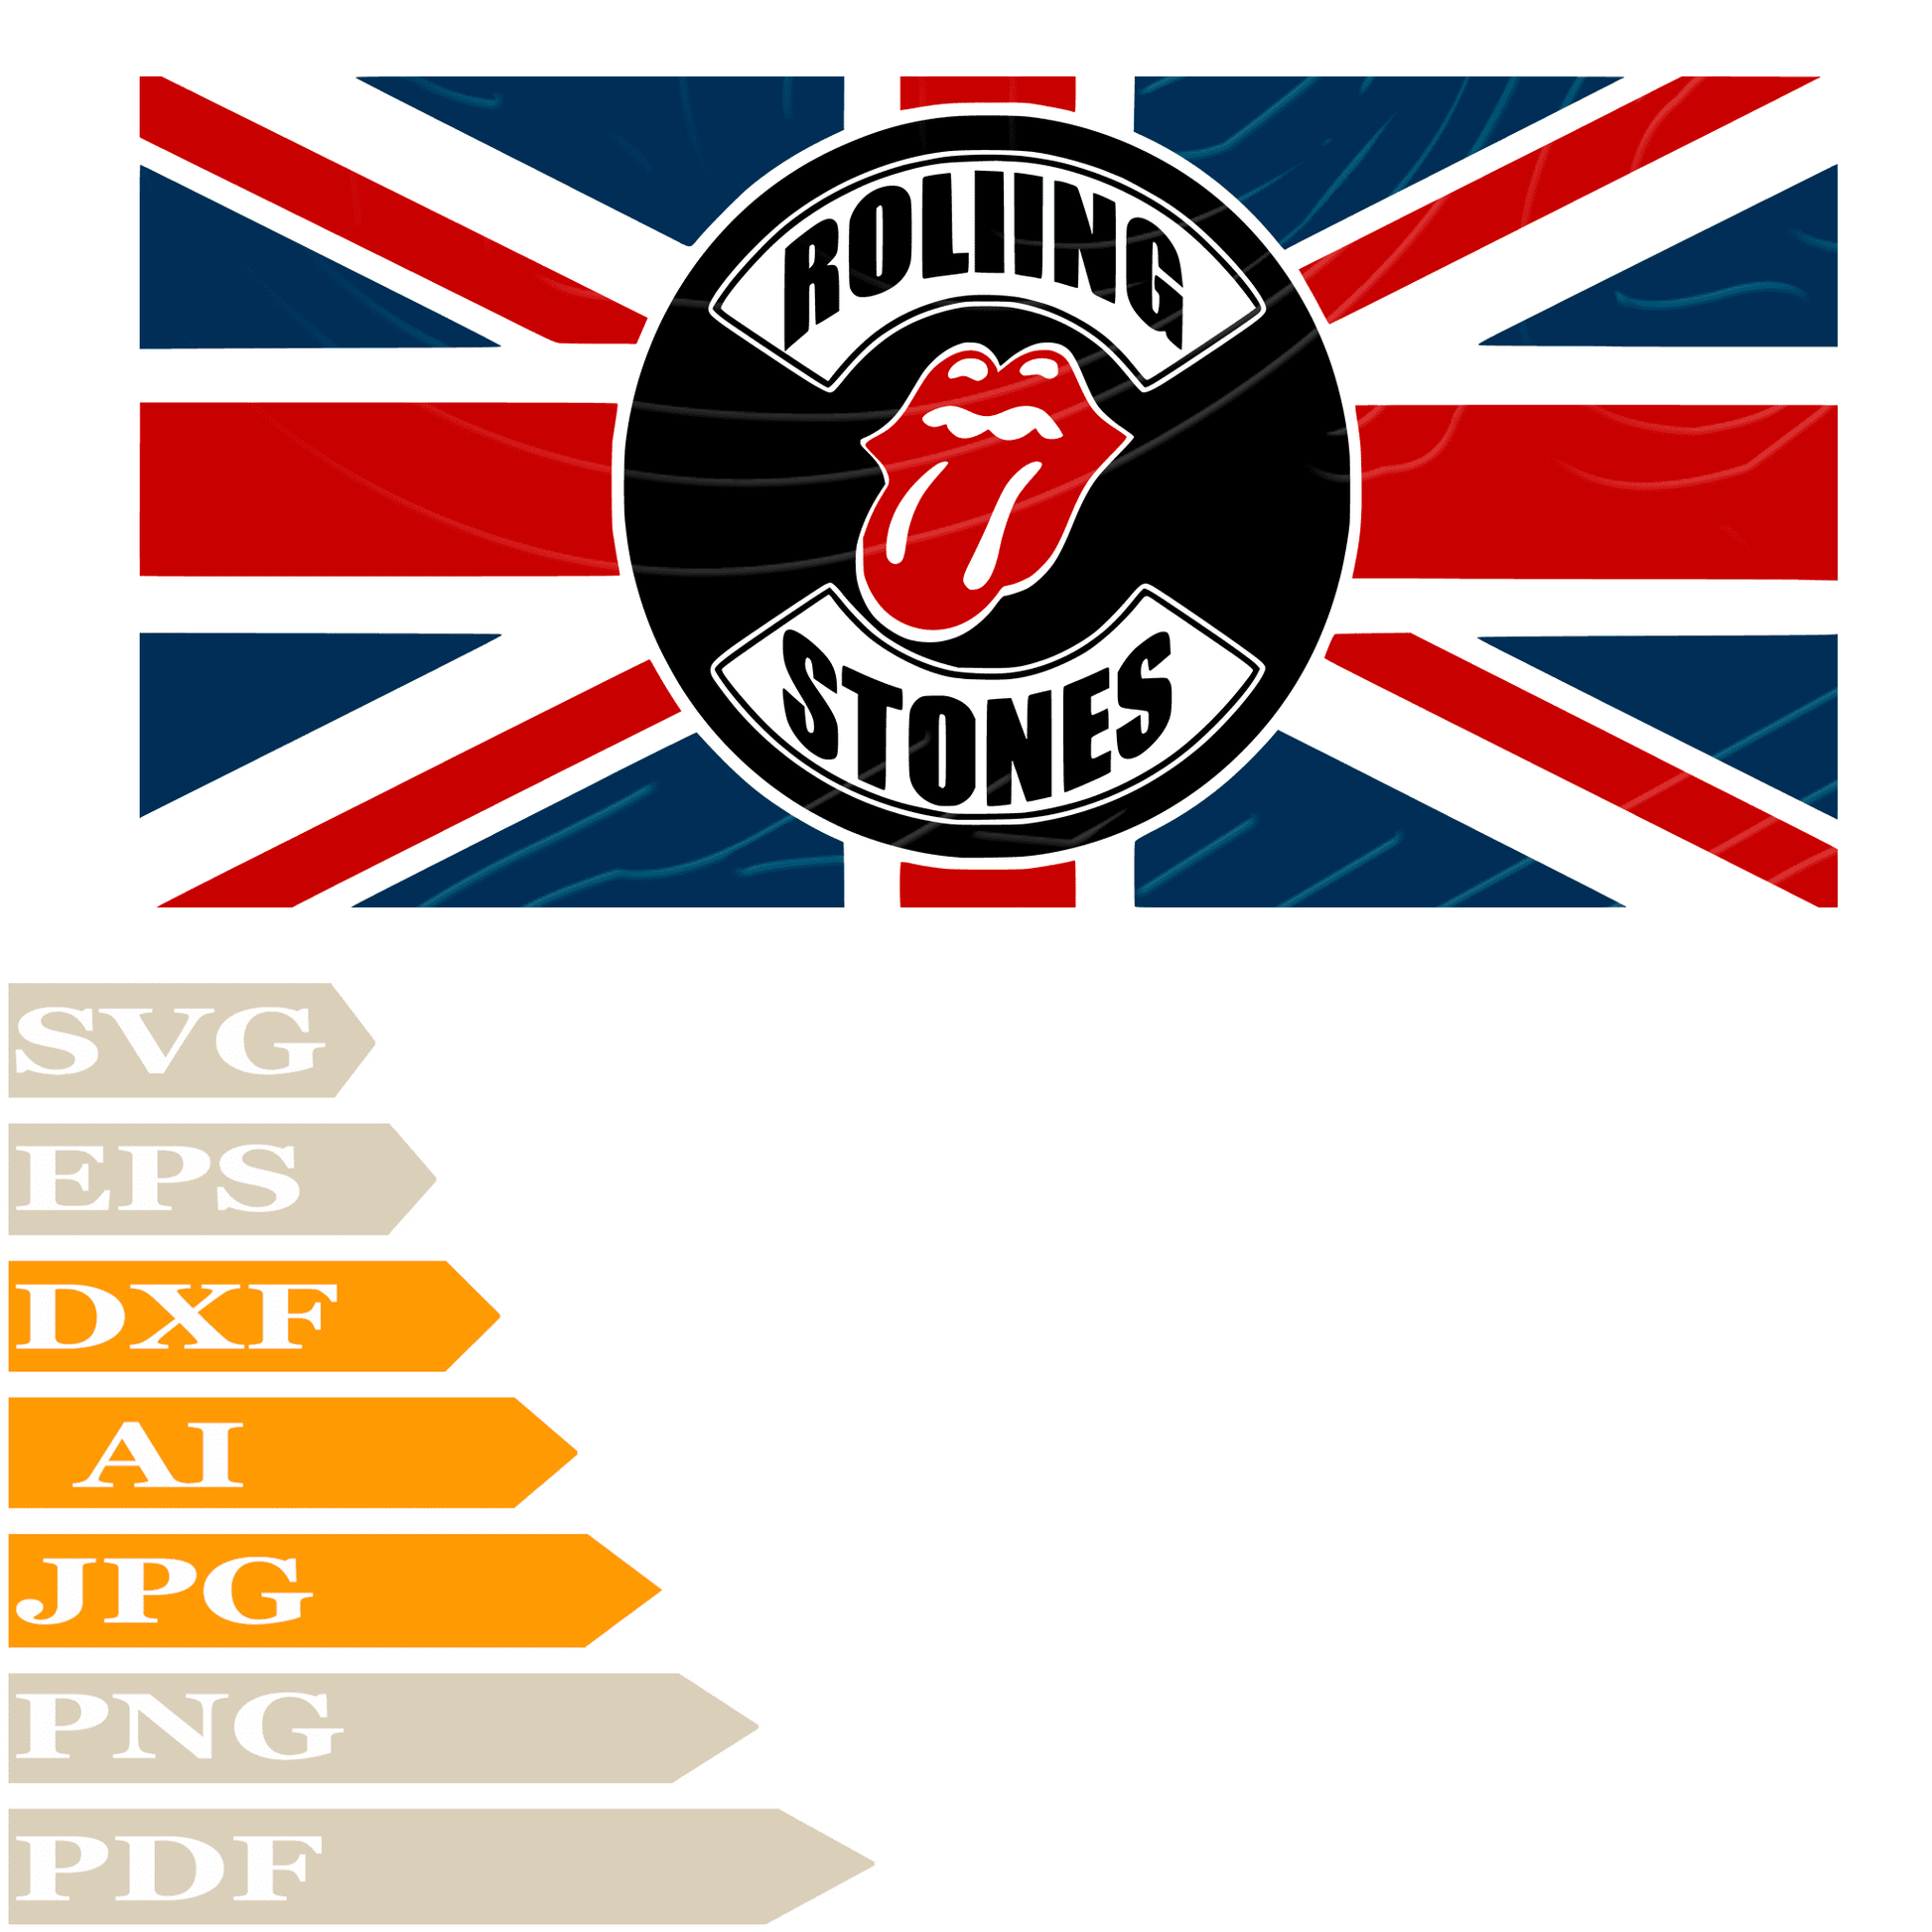 Rolling Stones SVG File, The Rolling Stones Logo SVG Design, Rock Band Rolling Stones Digital Vector, Rolling Stones Logo PNG, PDF, DXF, For Cricut, Clipart, Cut File, Instant Download, T-Shirt, For Tattoo, Silhouette